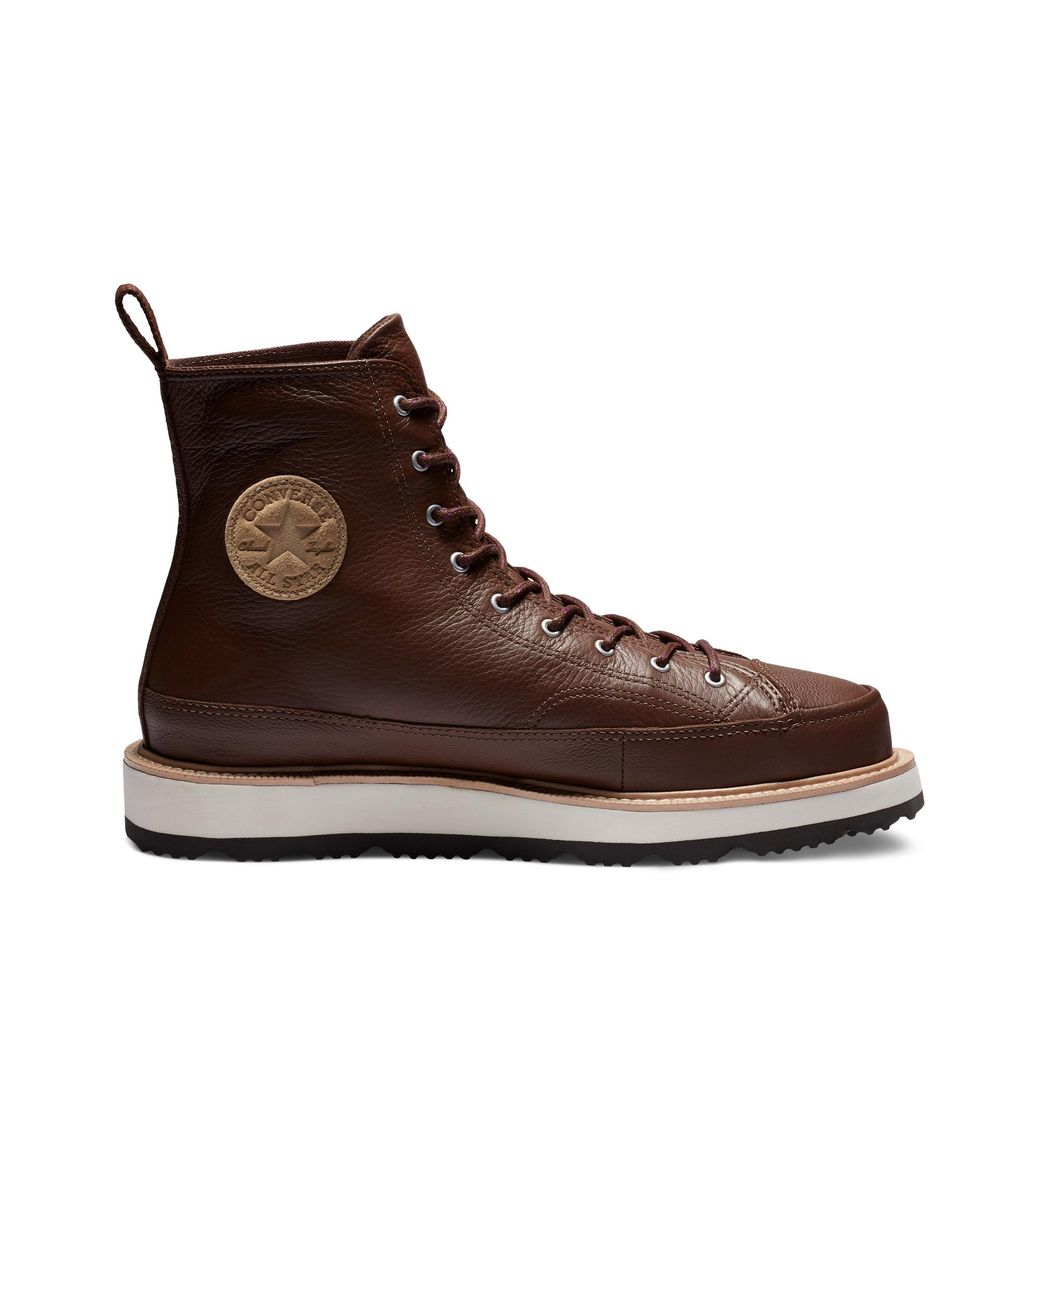 Converse Chuck Taylor Crafted Boot in Brown | Lyst